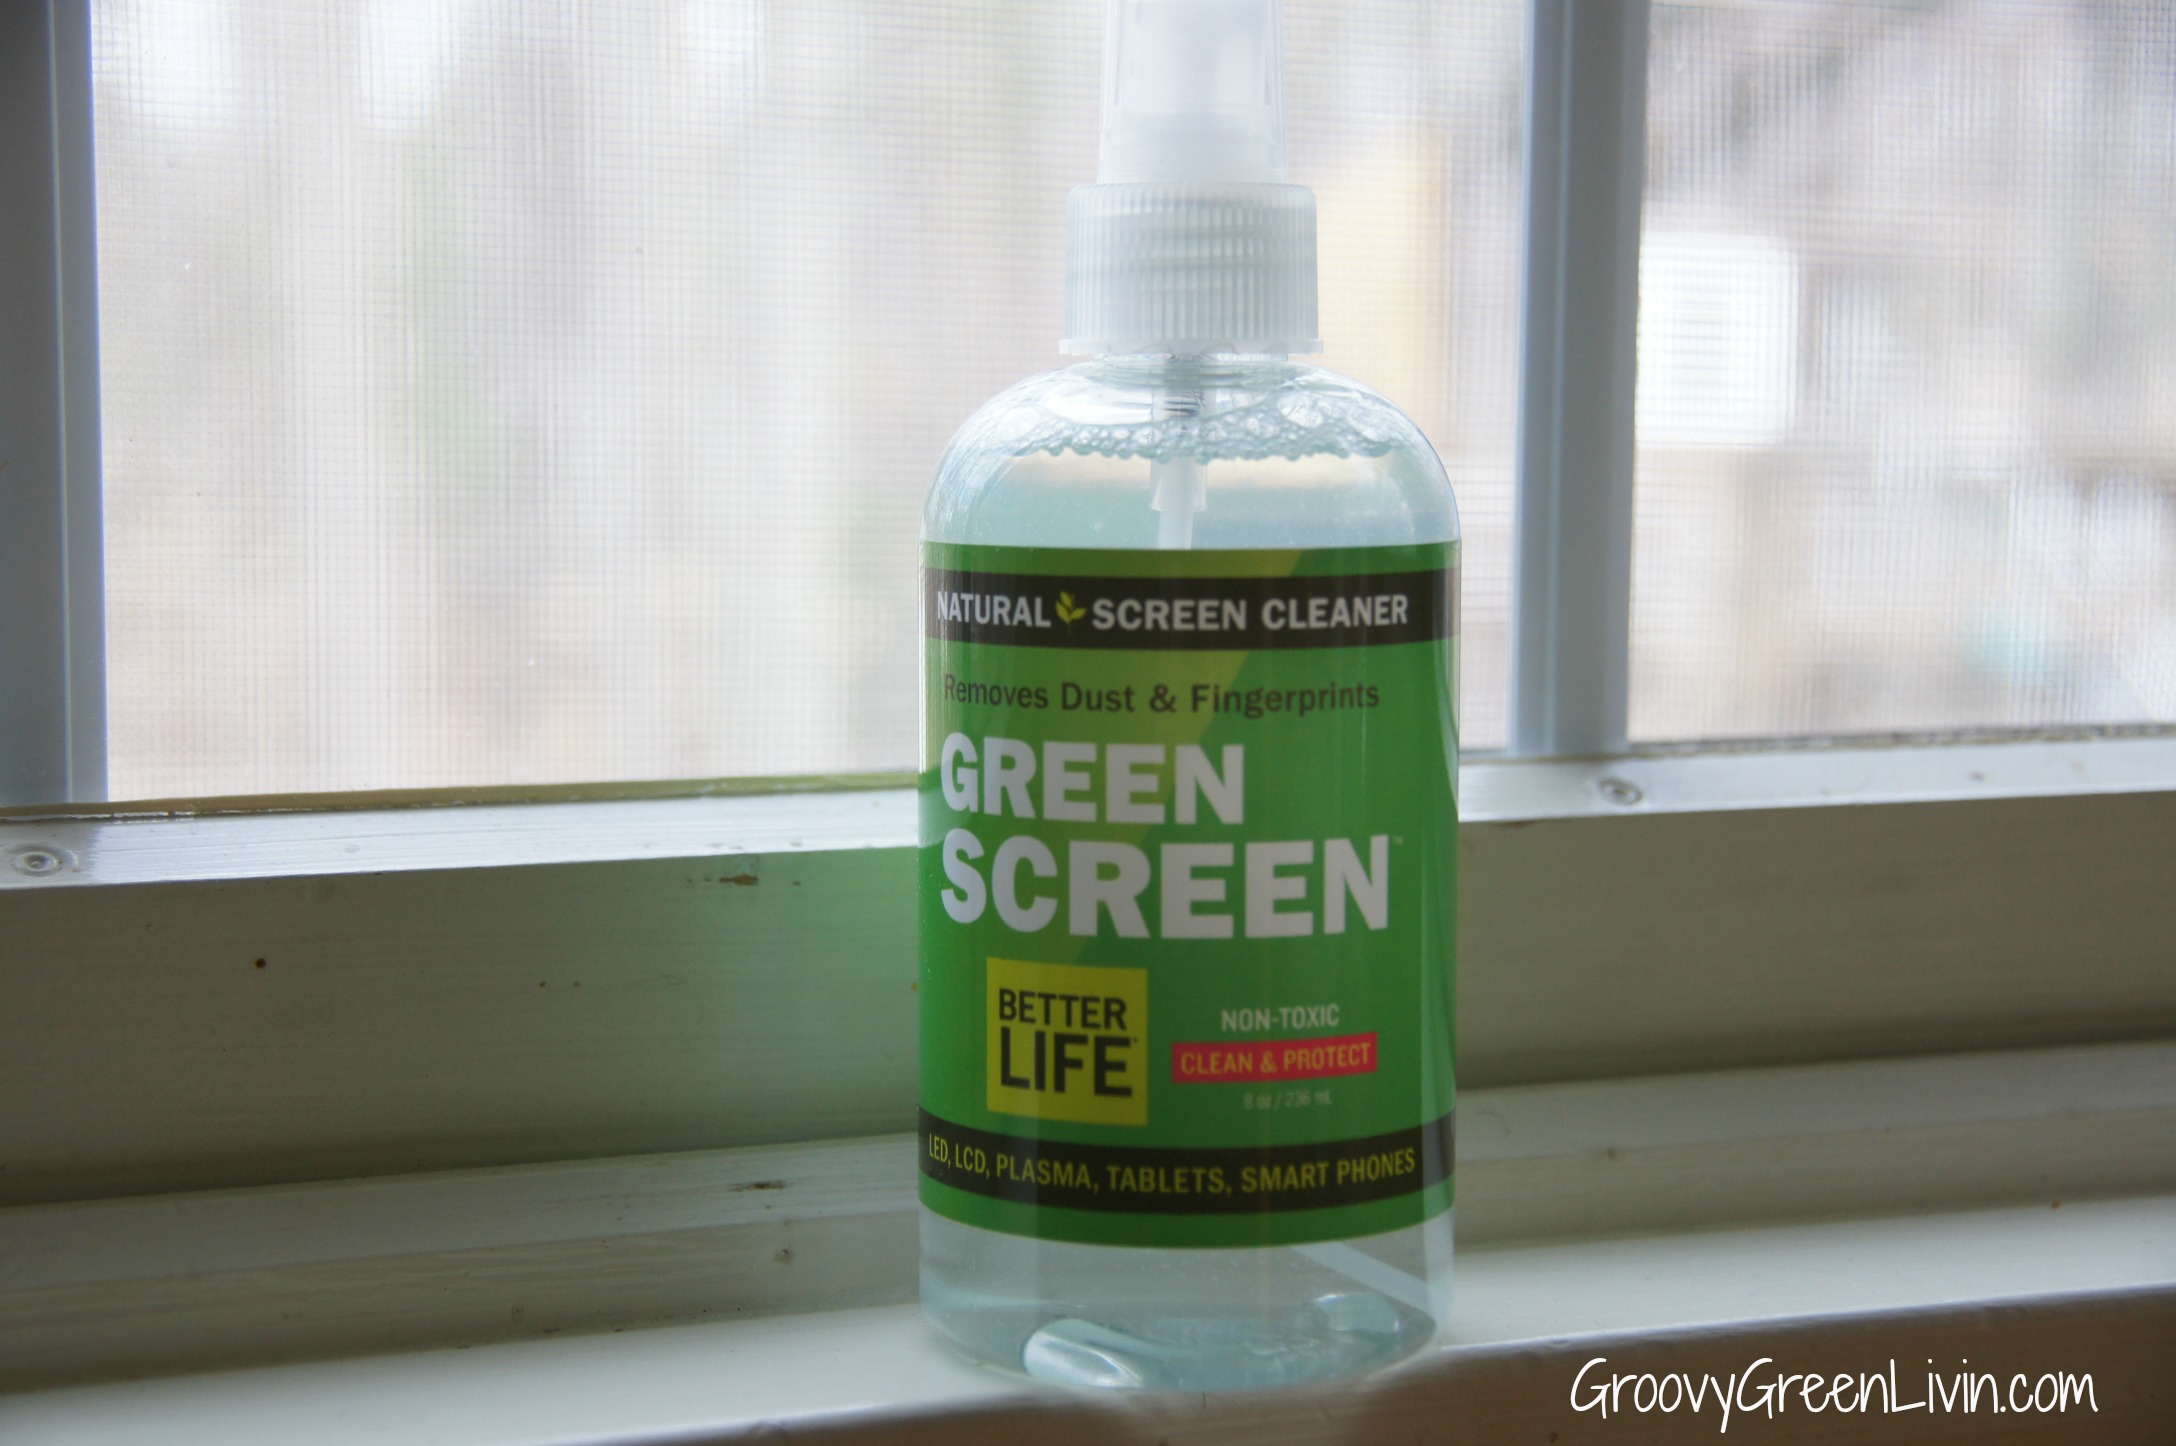 Groovy Green Livin non-toxic cleaning products